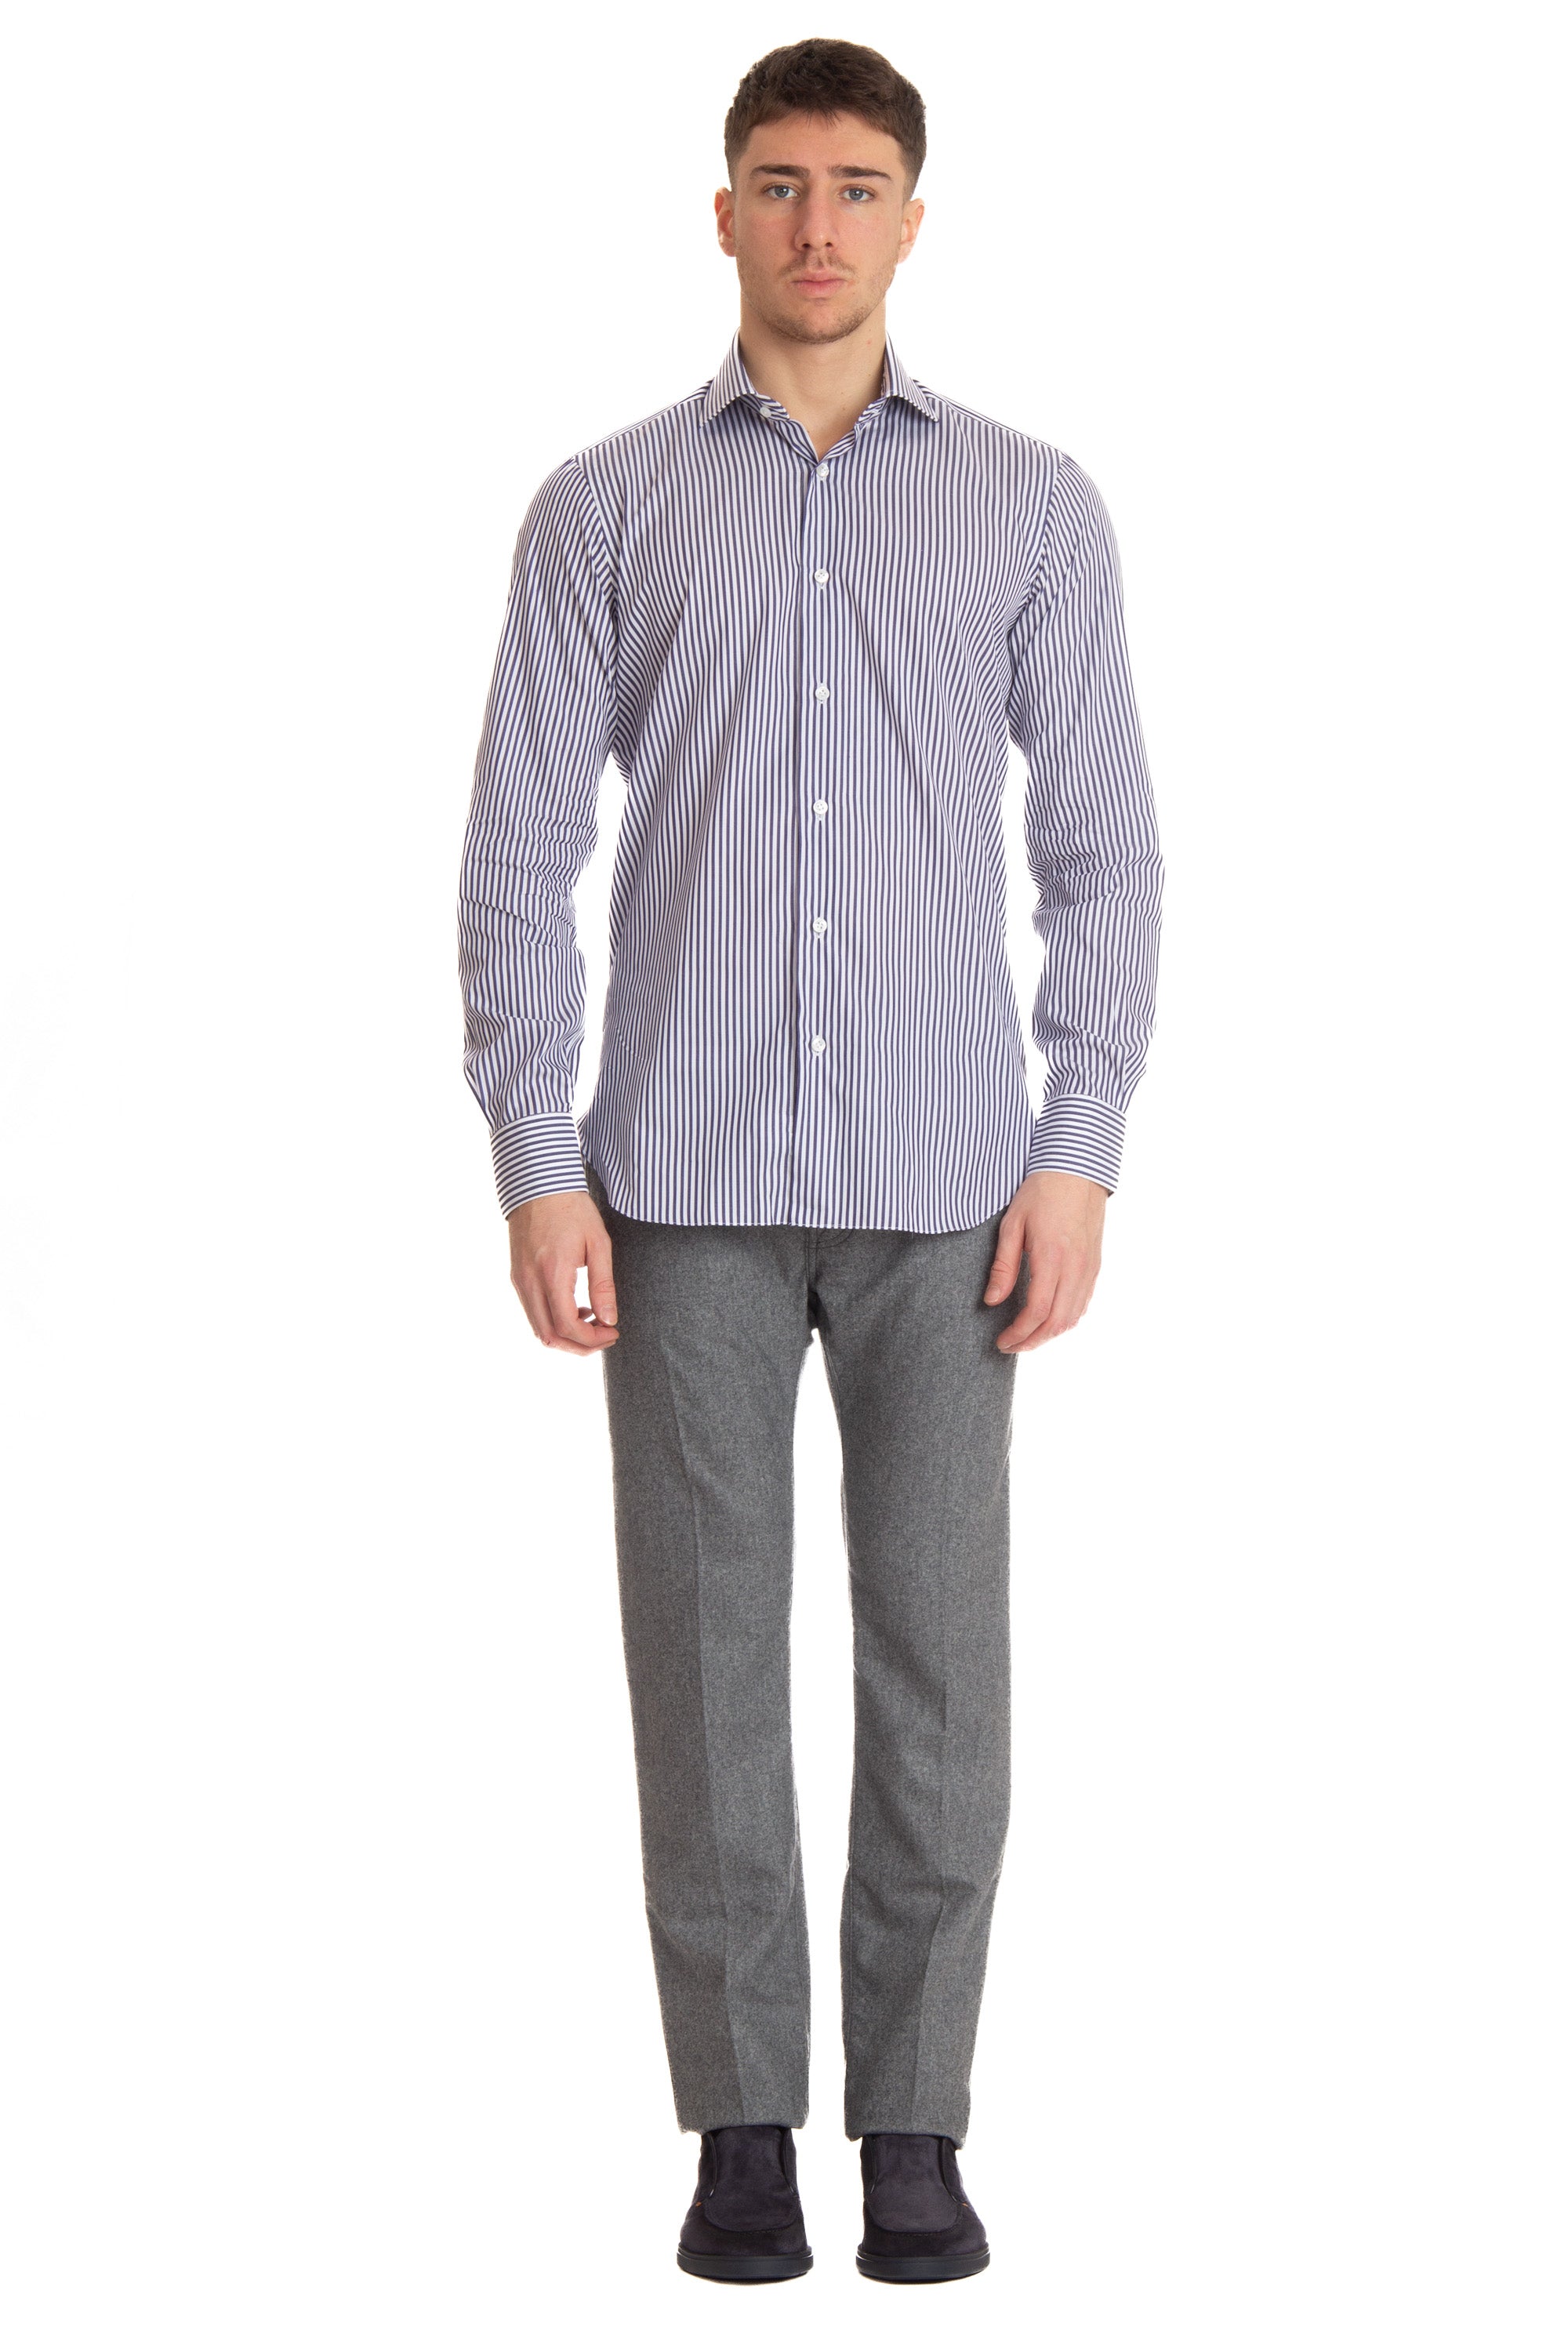 Culto line tailored tailored shirt